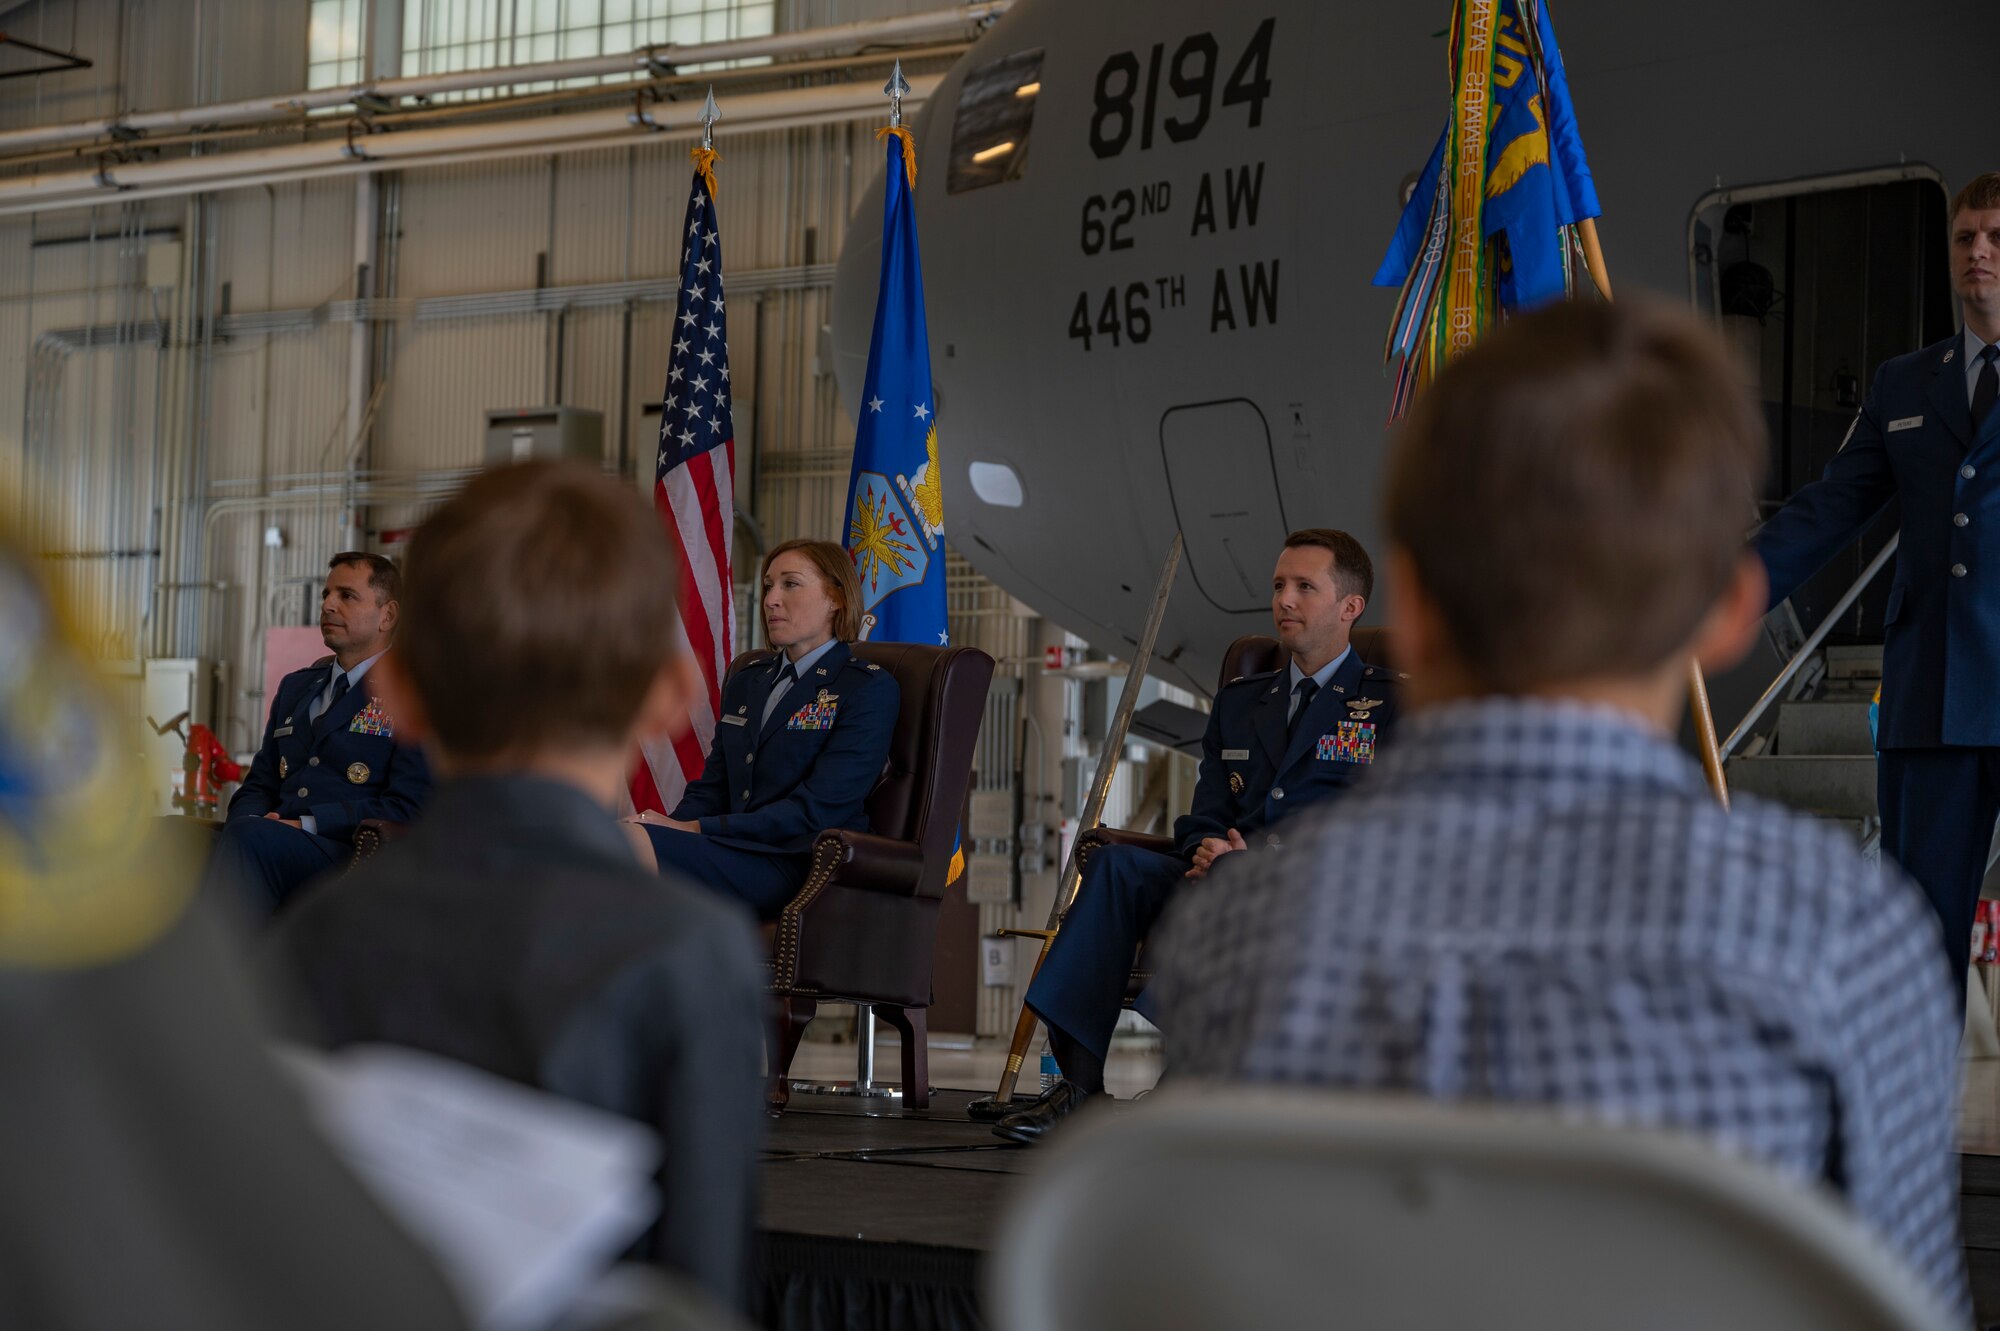 U.S. Air Force Col. Sergio Anaya, left, commander of the 62d Operations Group, Lt. Col. Susanne Lonsberry, center, outgoing commander of the 7th Airlift Squadron, and Lt. Col. Brandon Westling, incoming commander of the 7th AS, listen to remarks during the 7th AS change of command ceremony at Joint Base Lewis-McChord, Washington, June 16, 2022. Aircrews of the 7th AS operate the C-17 Globemaster III aircraft, directly supporting numerous U.S. government agencies and international forces in global operations ranging from troop airlift/airdrop to lifesaving medevac and humanitarian/disaster relief. (U.S. Air Force photo by Airman 1st Class Charles Casner)